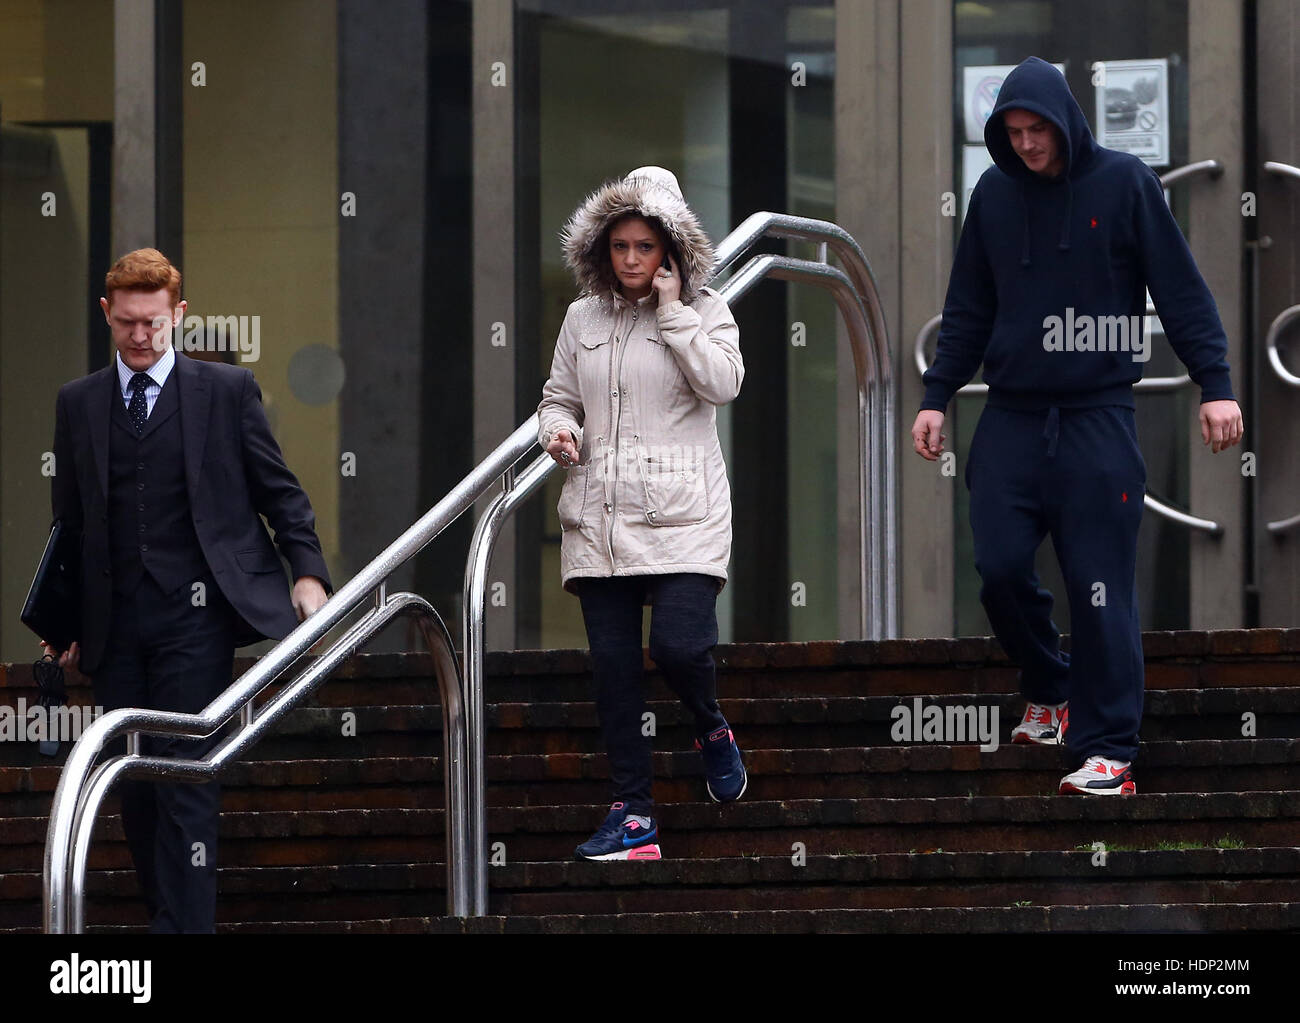 Katherine Cox (middle) and Danny Shepherd (right) leave Maidstone Crown Court after appearing charged with causing or allowing the death of a baby. Stock Photo